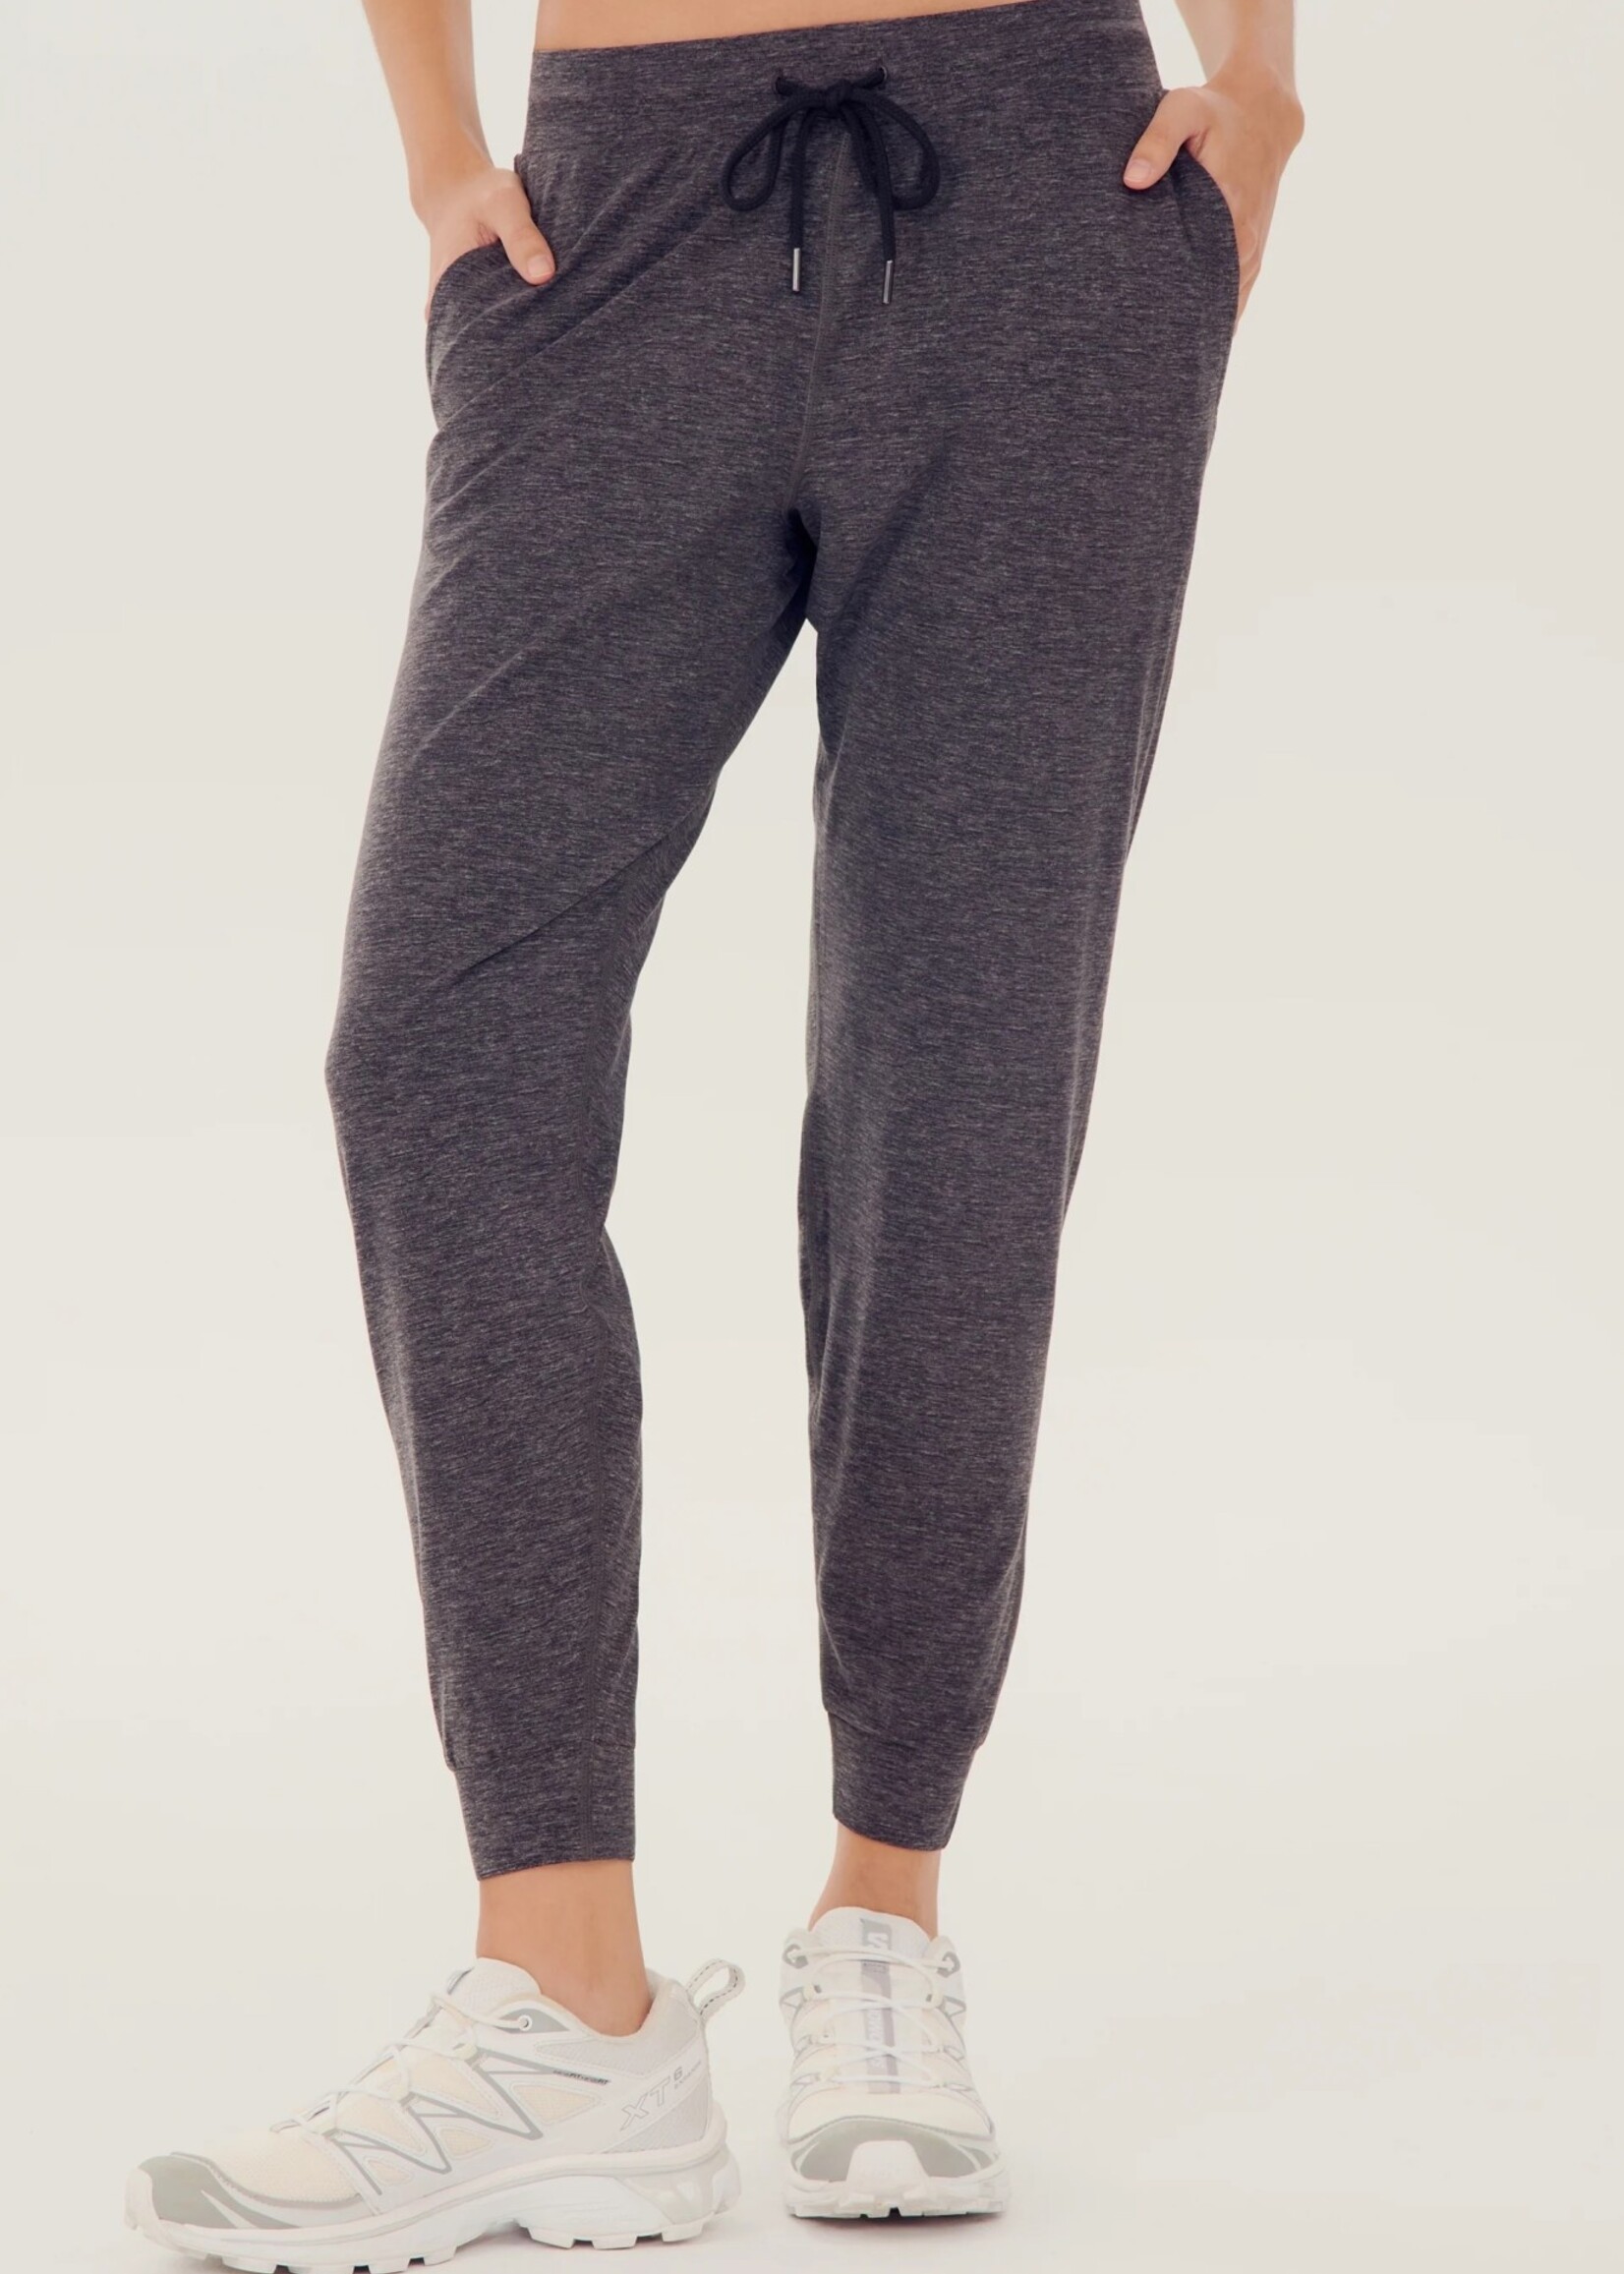 Splits59 Classic Airweight Jogger Heather Grey